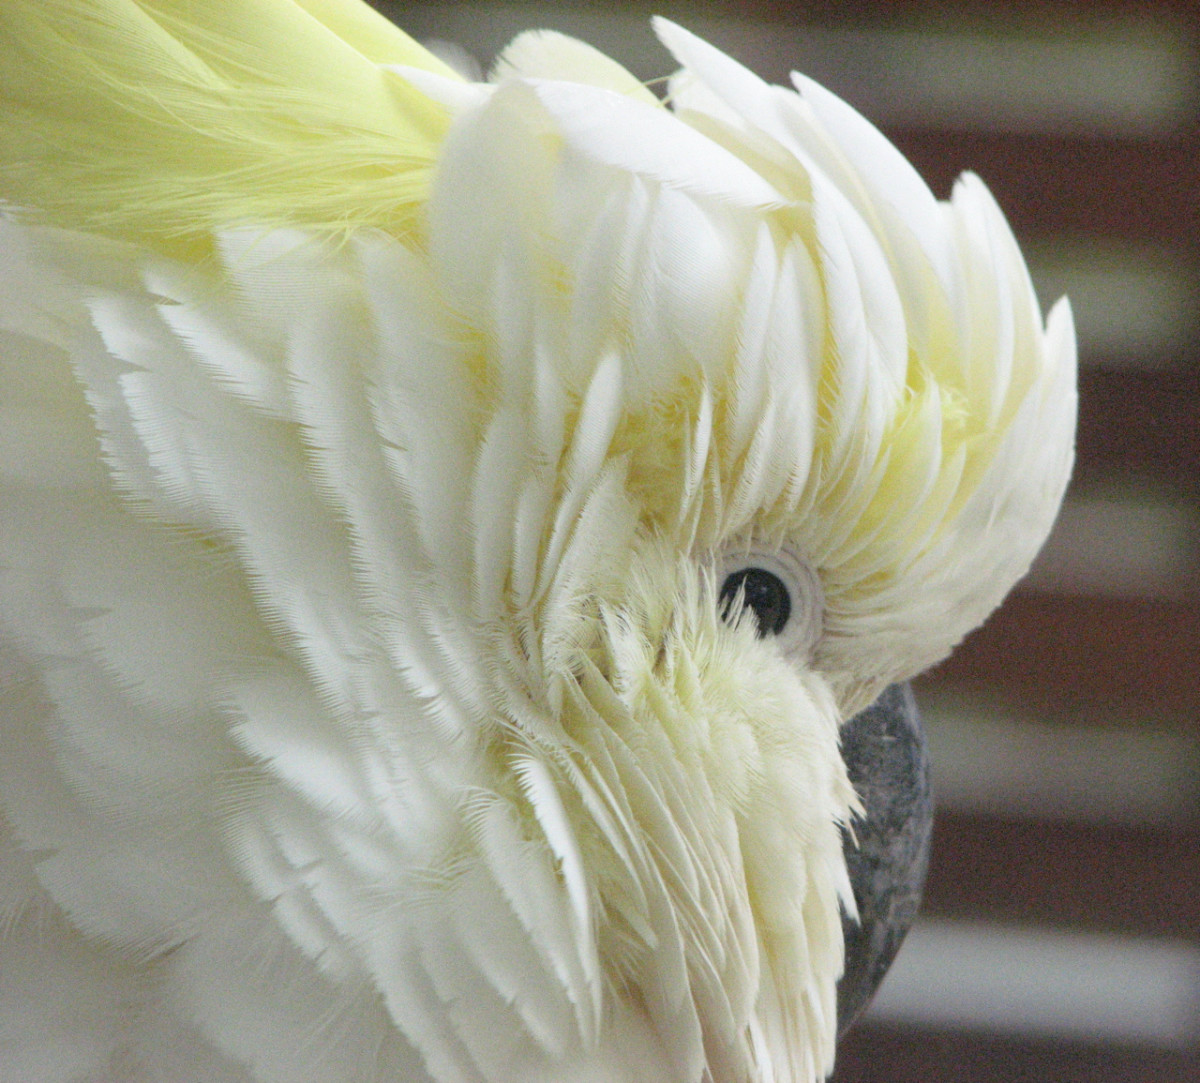 A close up of a cockatoo, ruffled against a cold wind. The frame is filled with the bird's face, focused on the eyes.